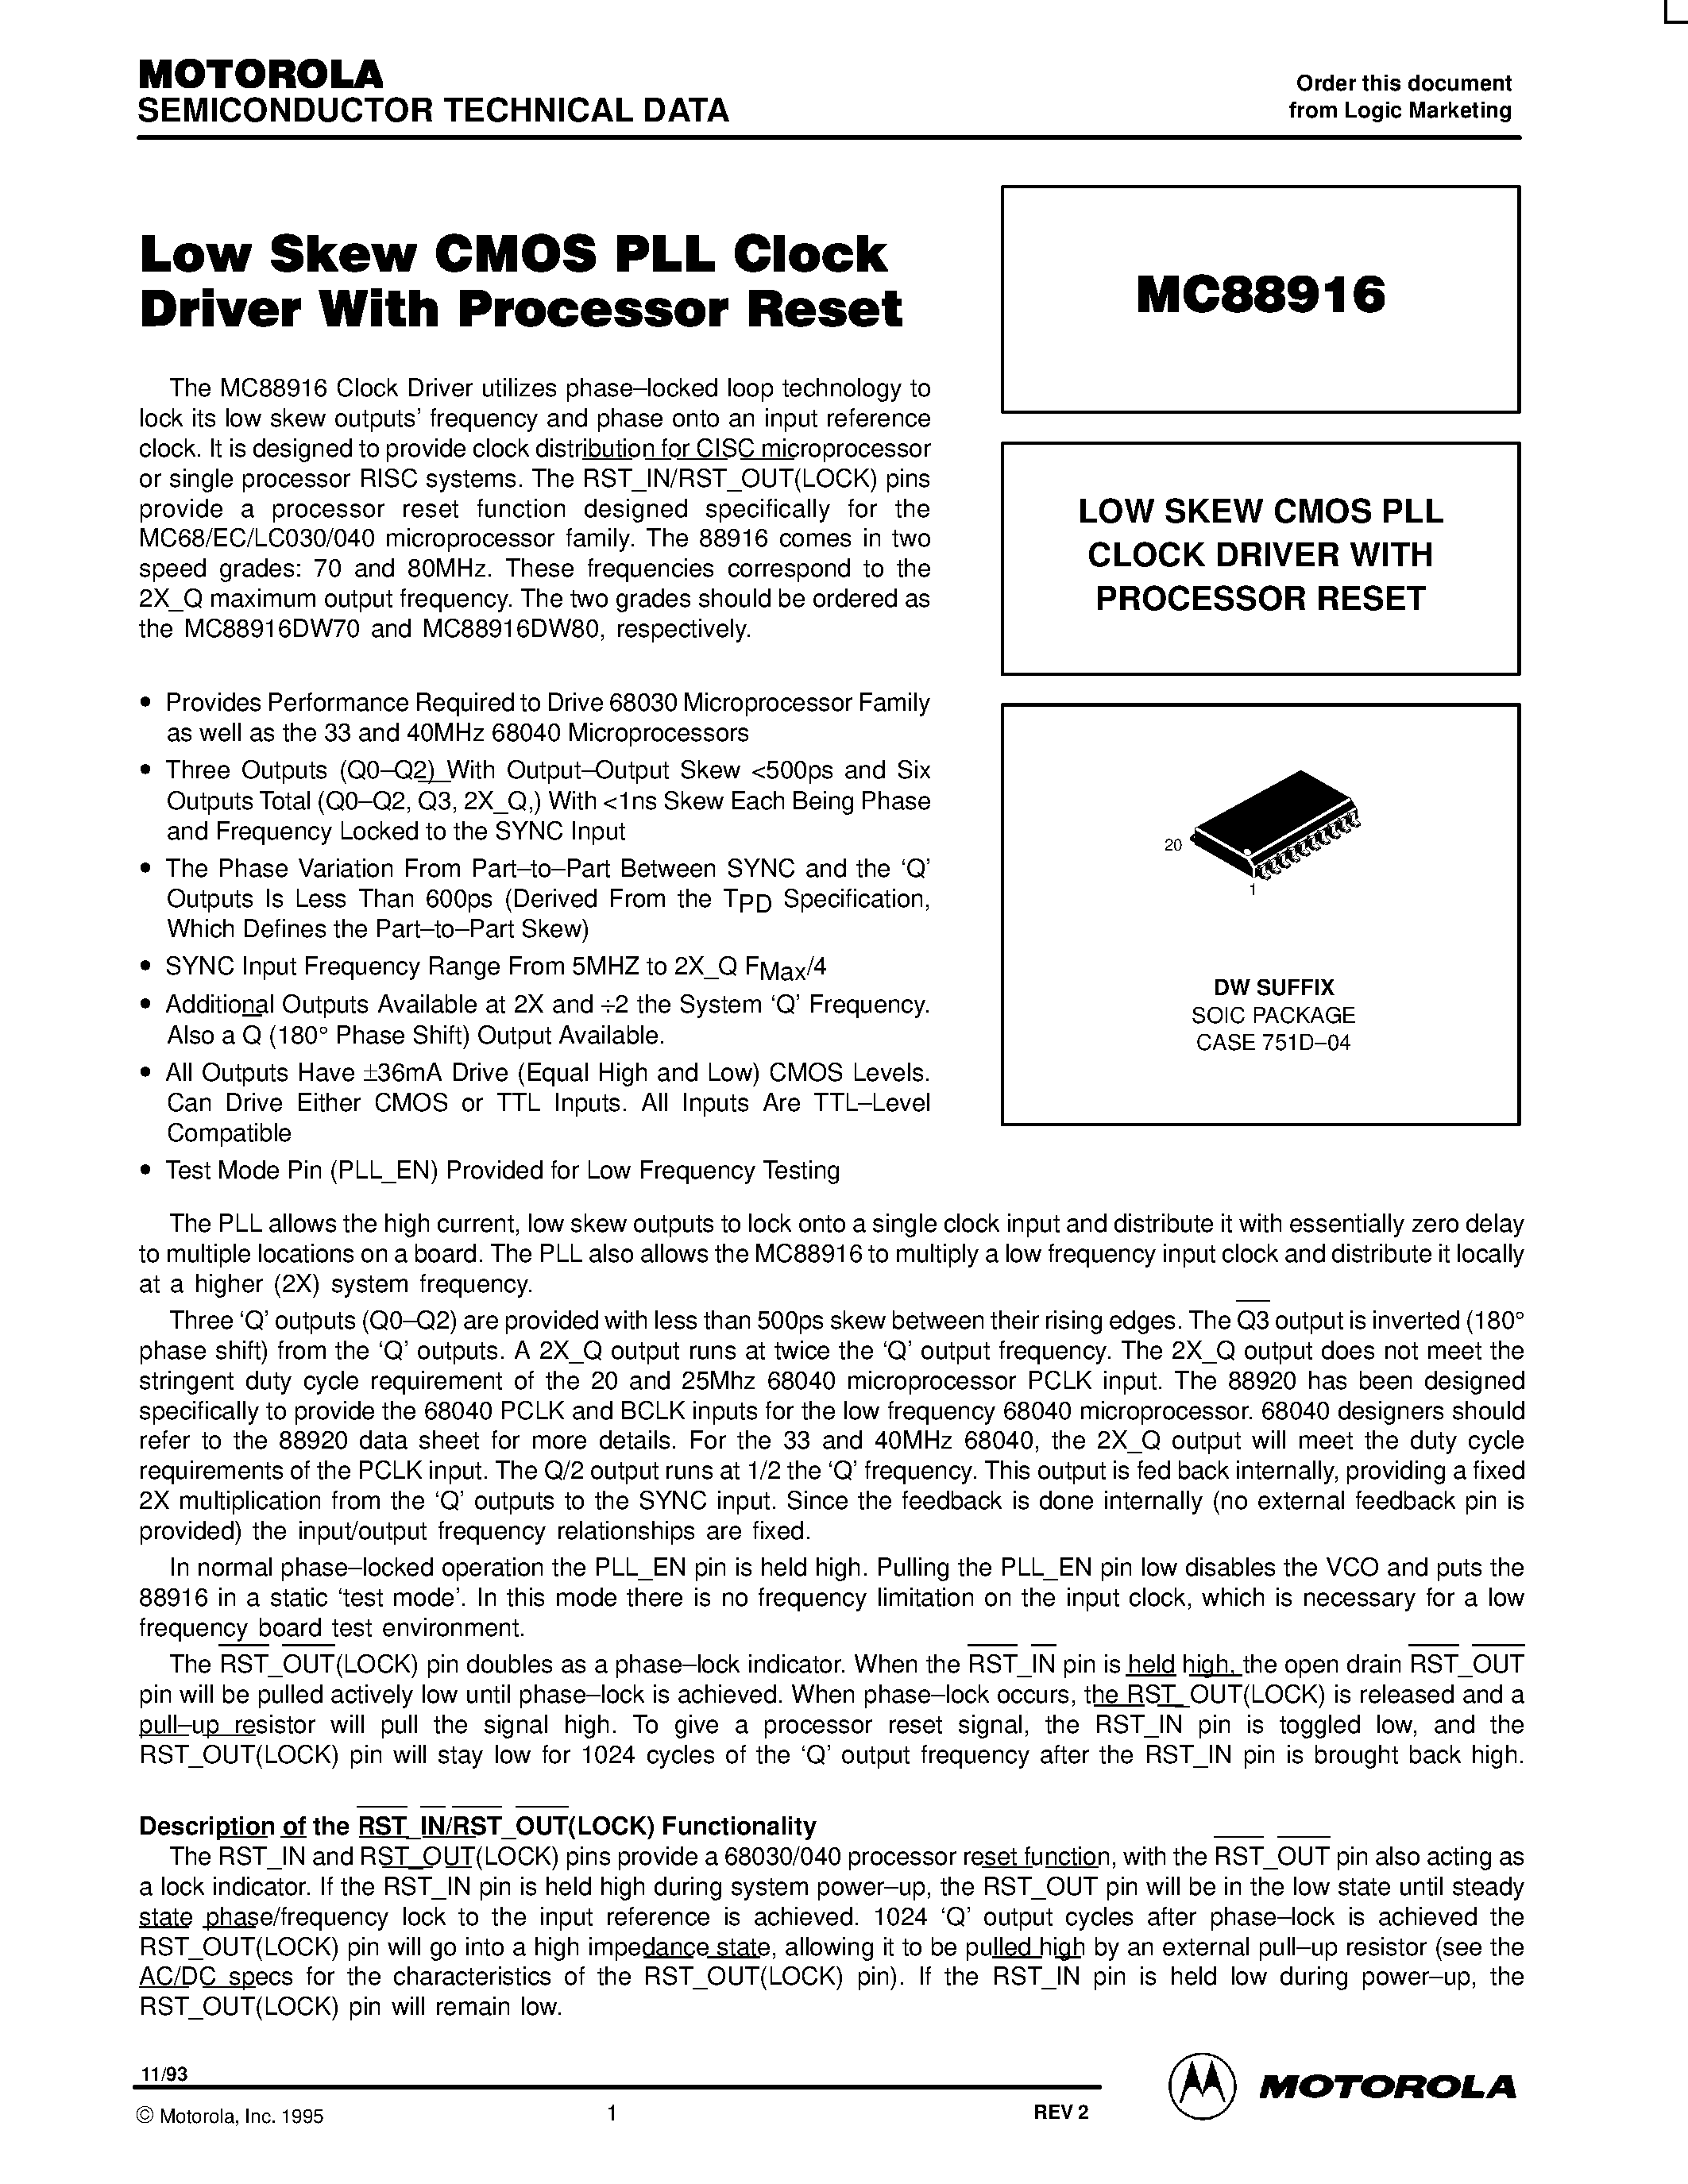 Datasheet MC88916DW - LOW SKEW CMOS PLL CLOCK DRIVER WITH PROCESSOR RESET page 1